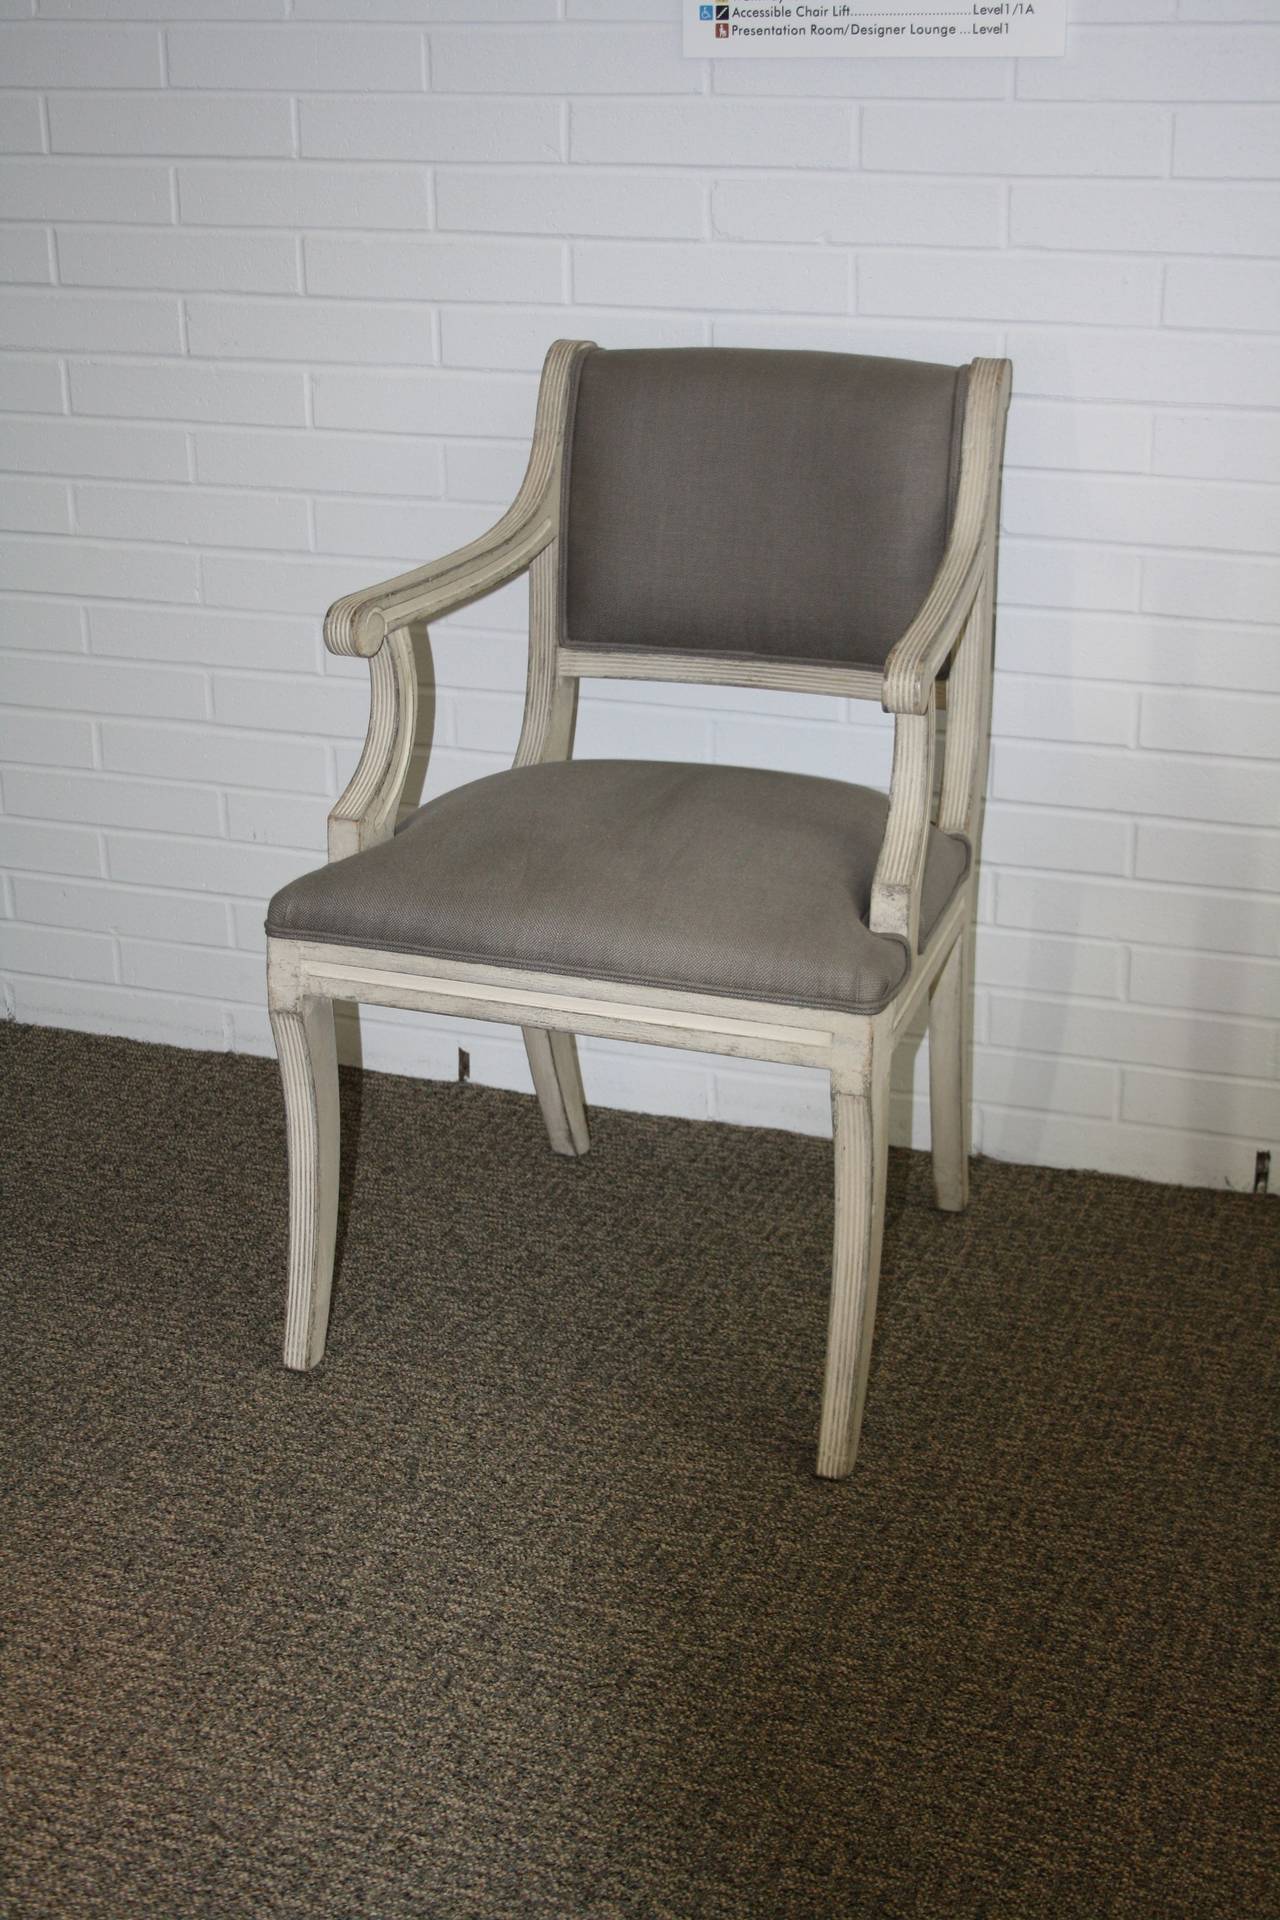 Empire Chair
With White Finish
And Grey Linen